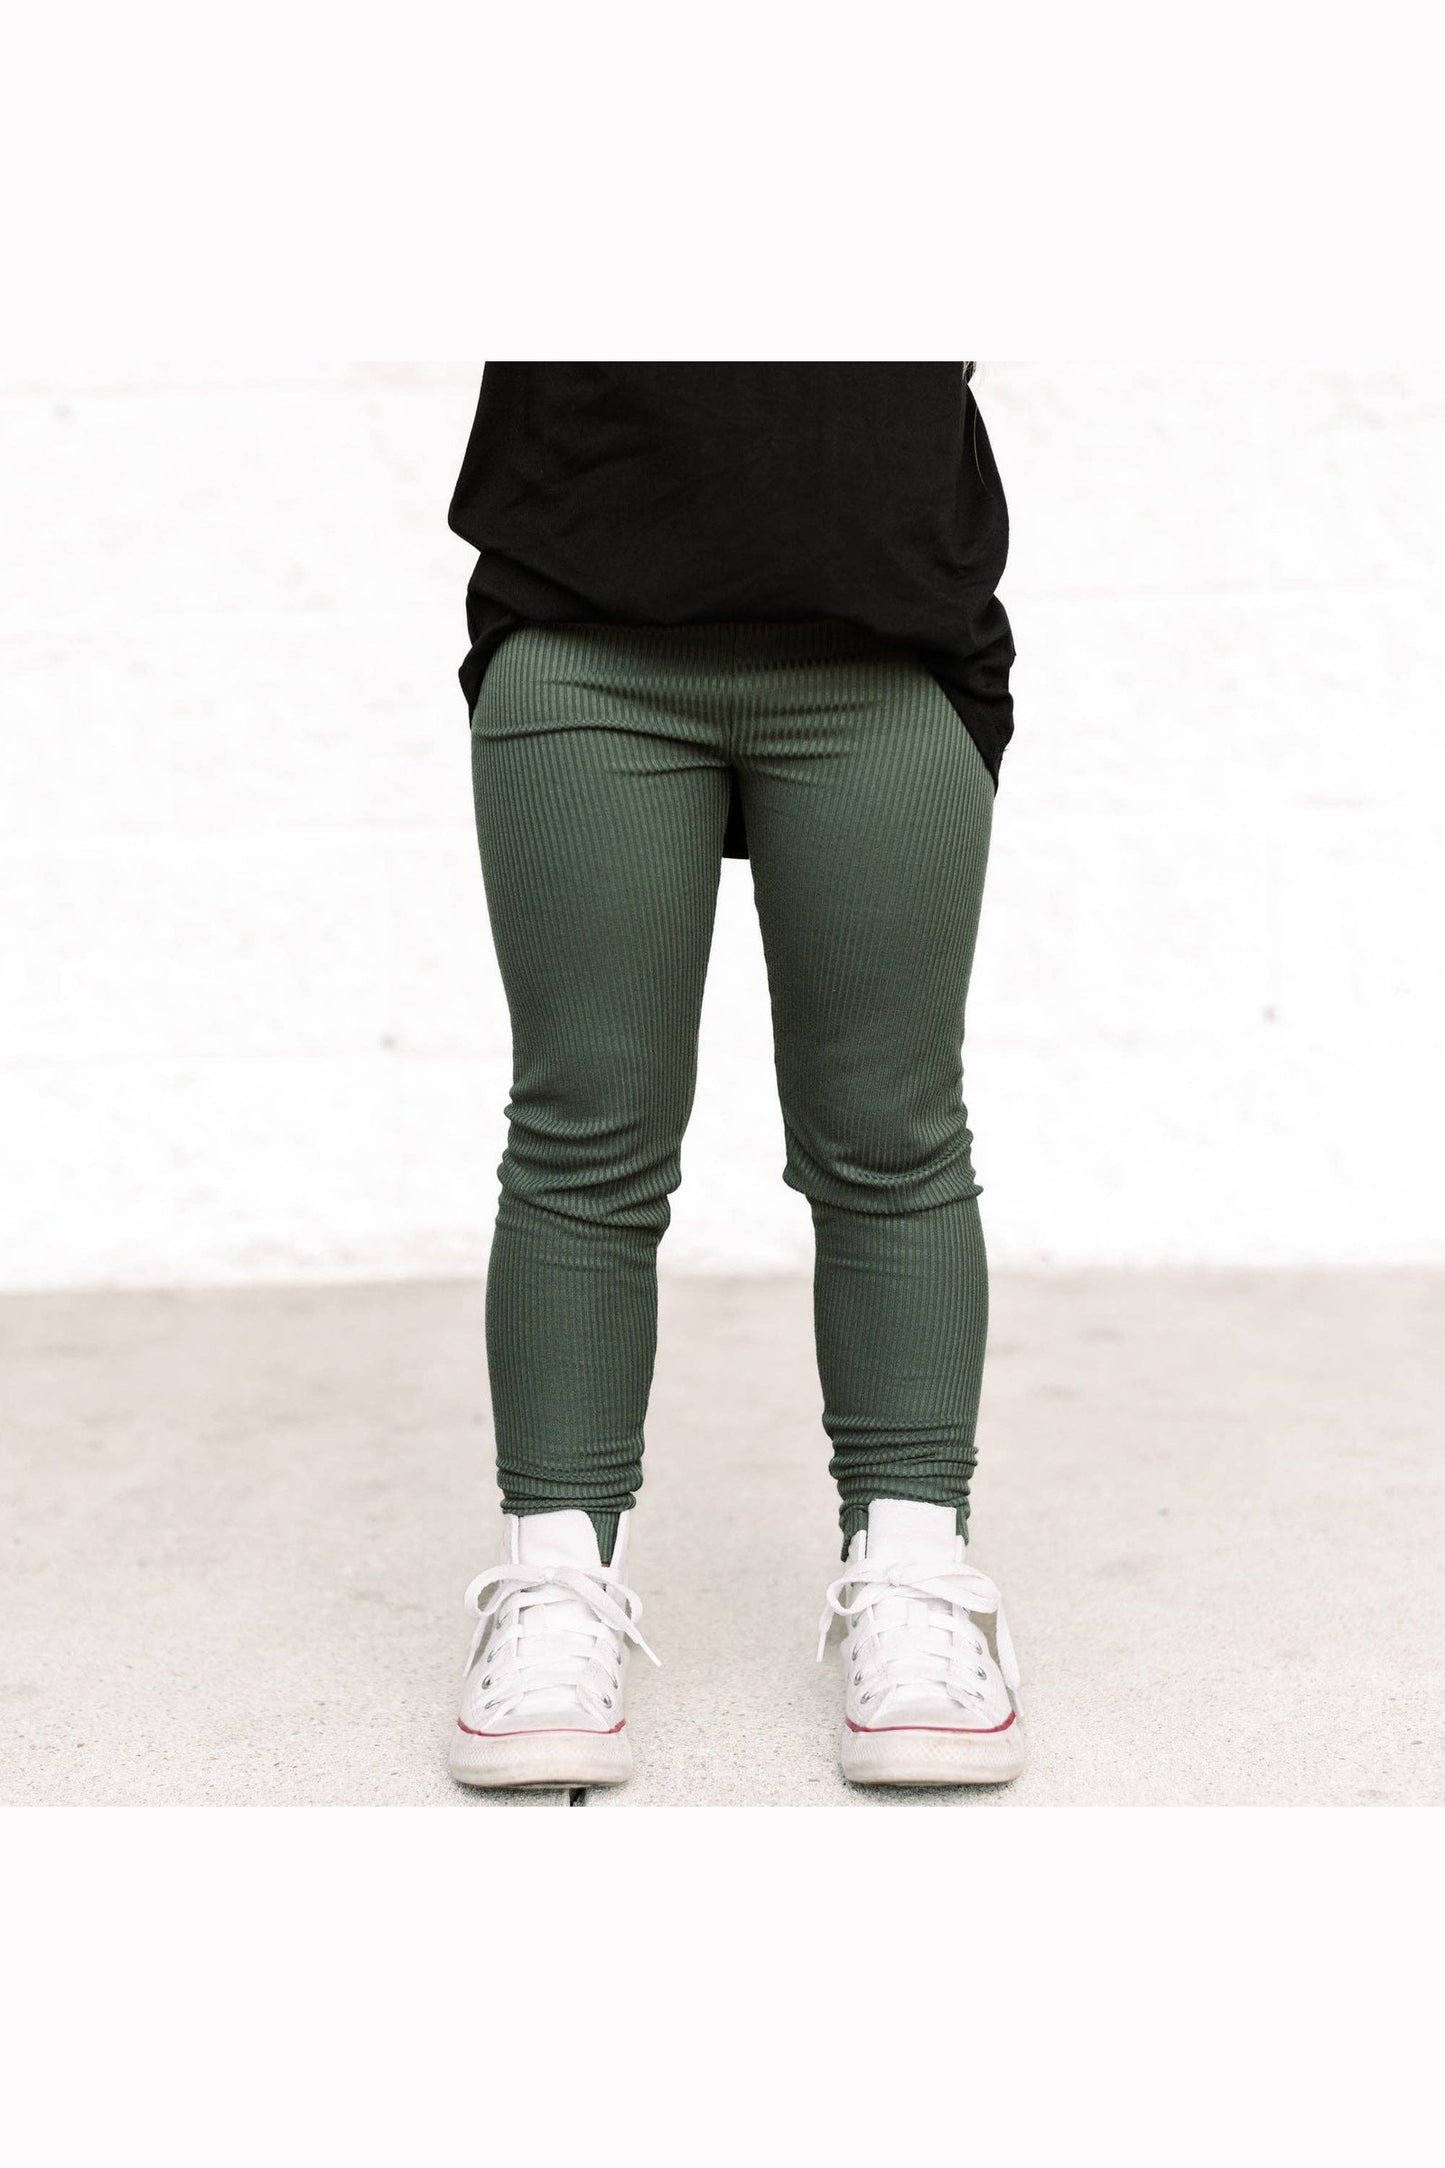 Max's Mossy Bamboo Rib Leggings Tea for Three: A Children's Boutique